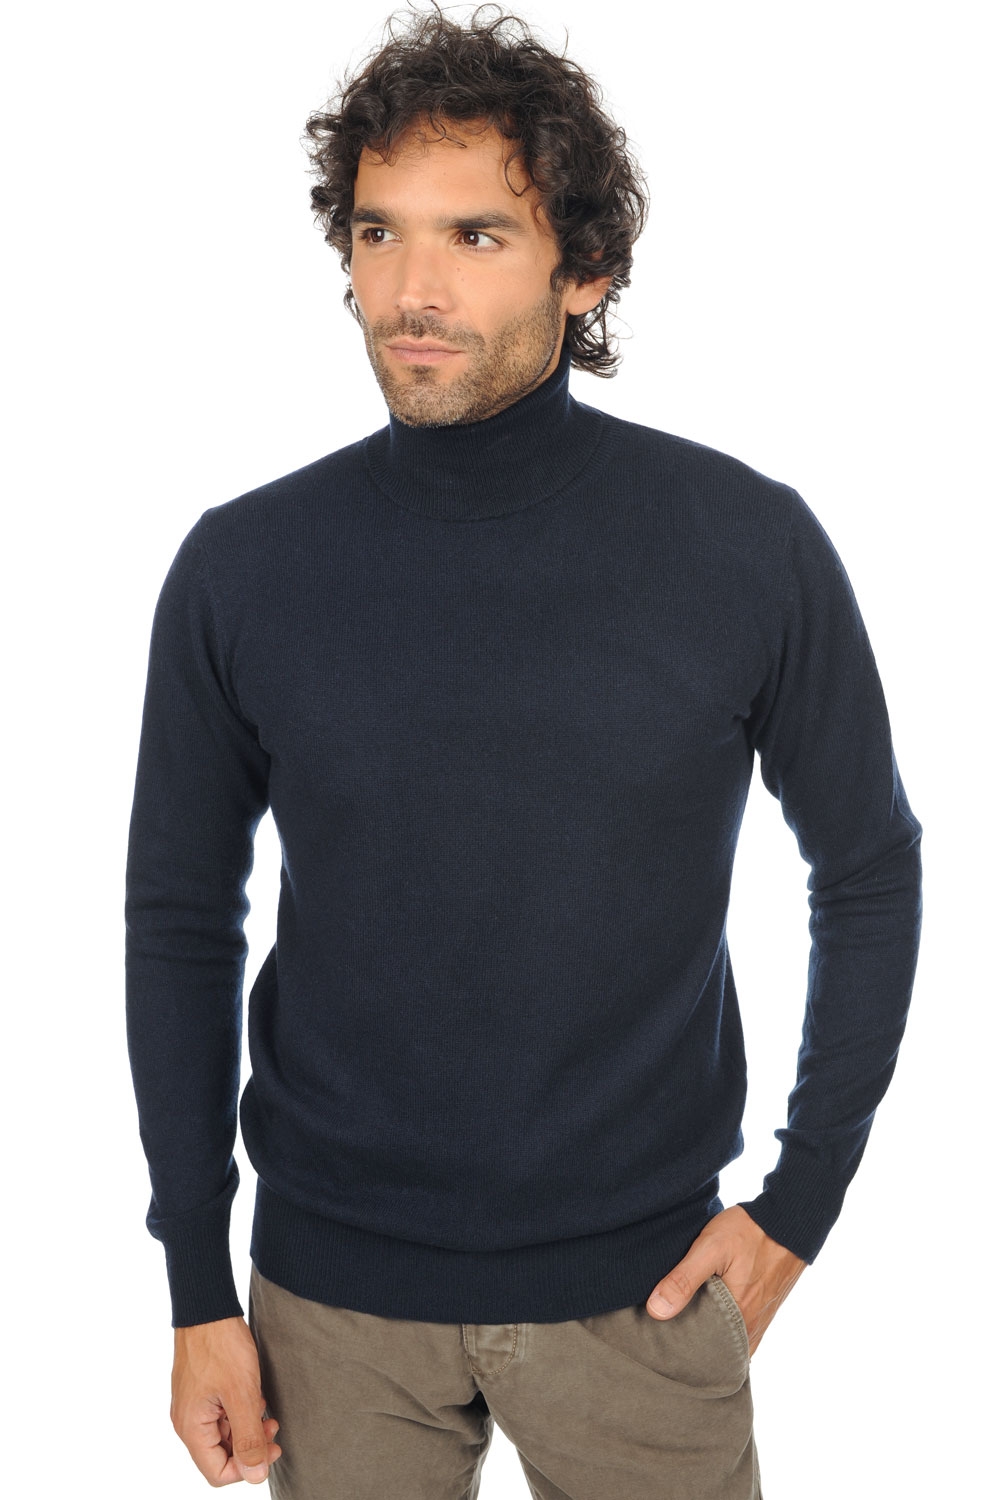 Cachemire pull homme tarry first marine fonce s